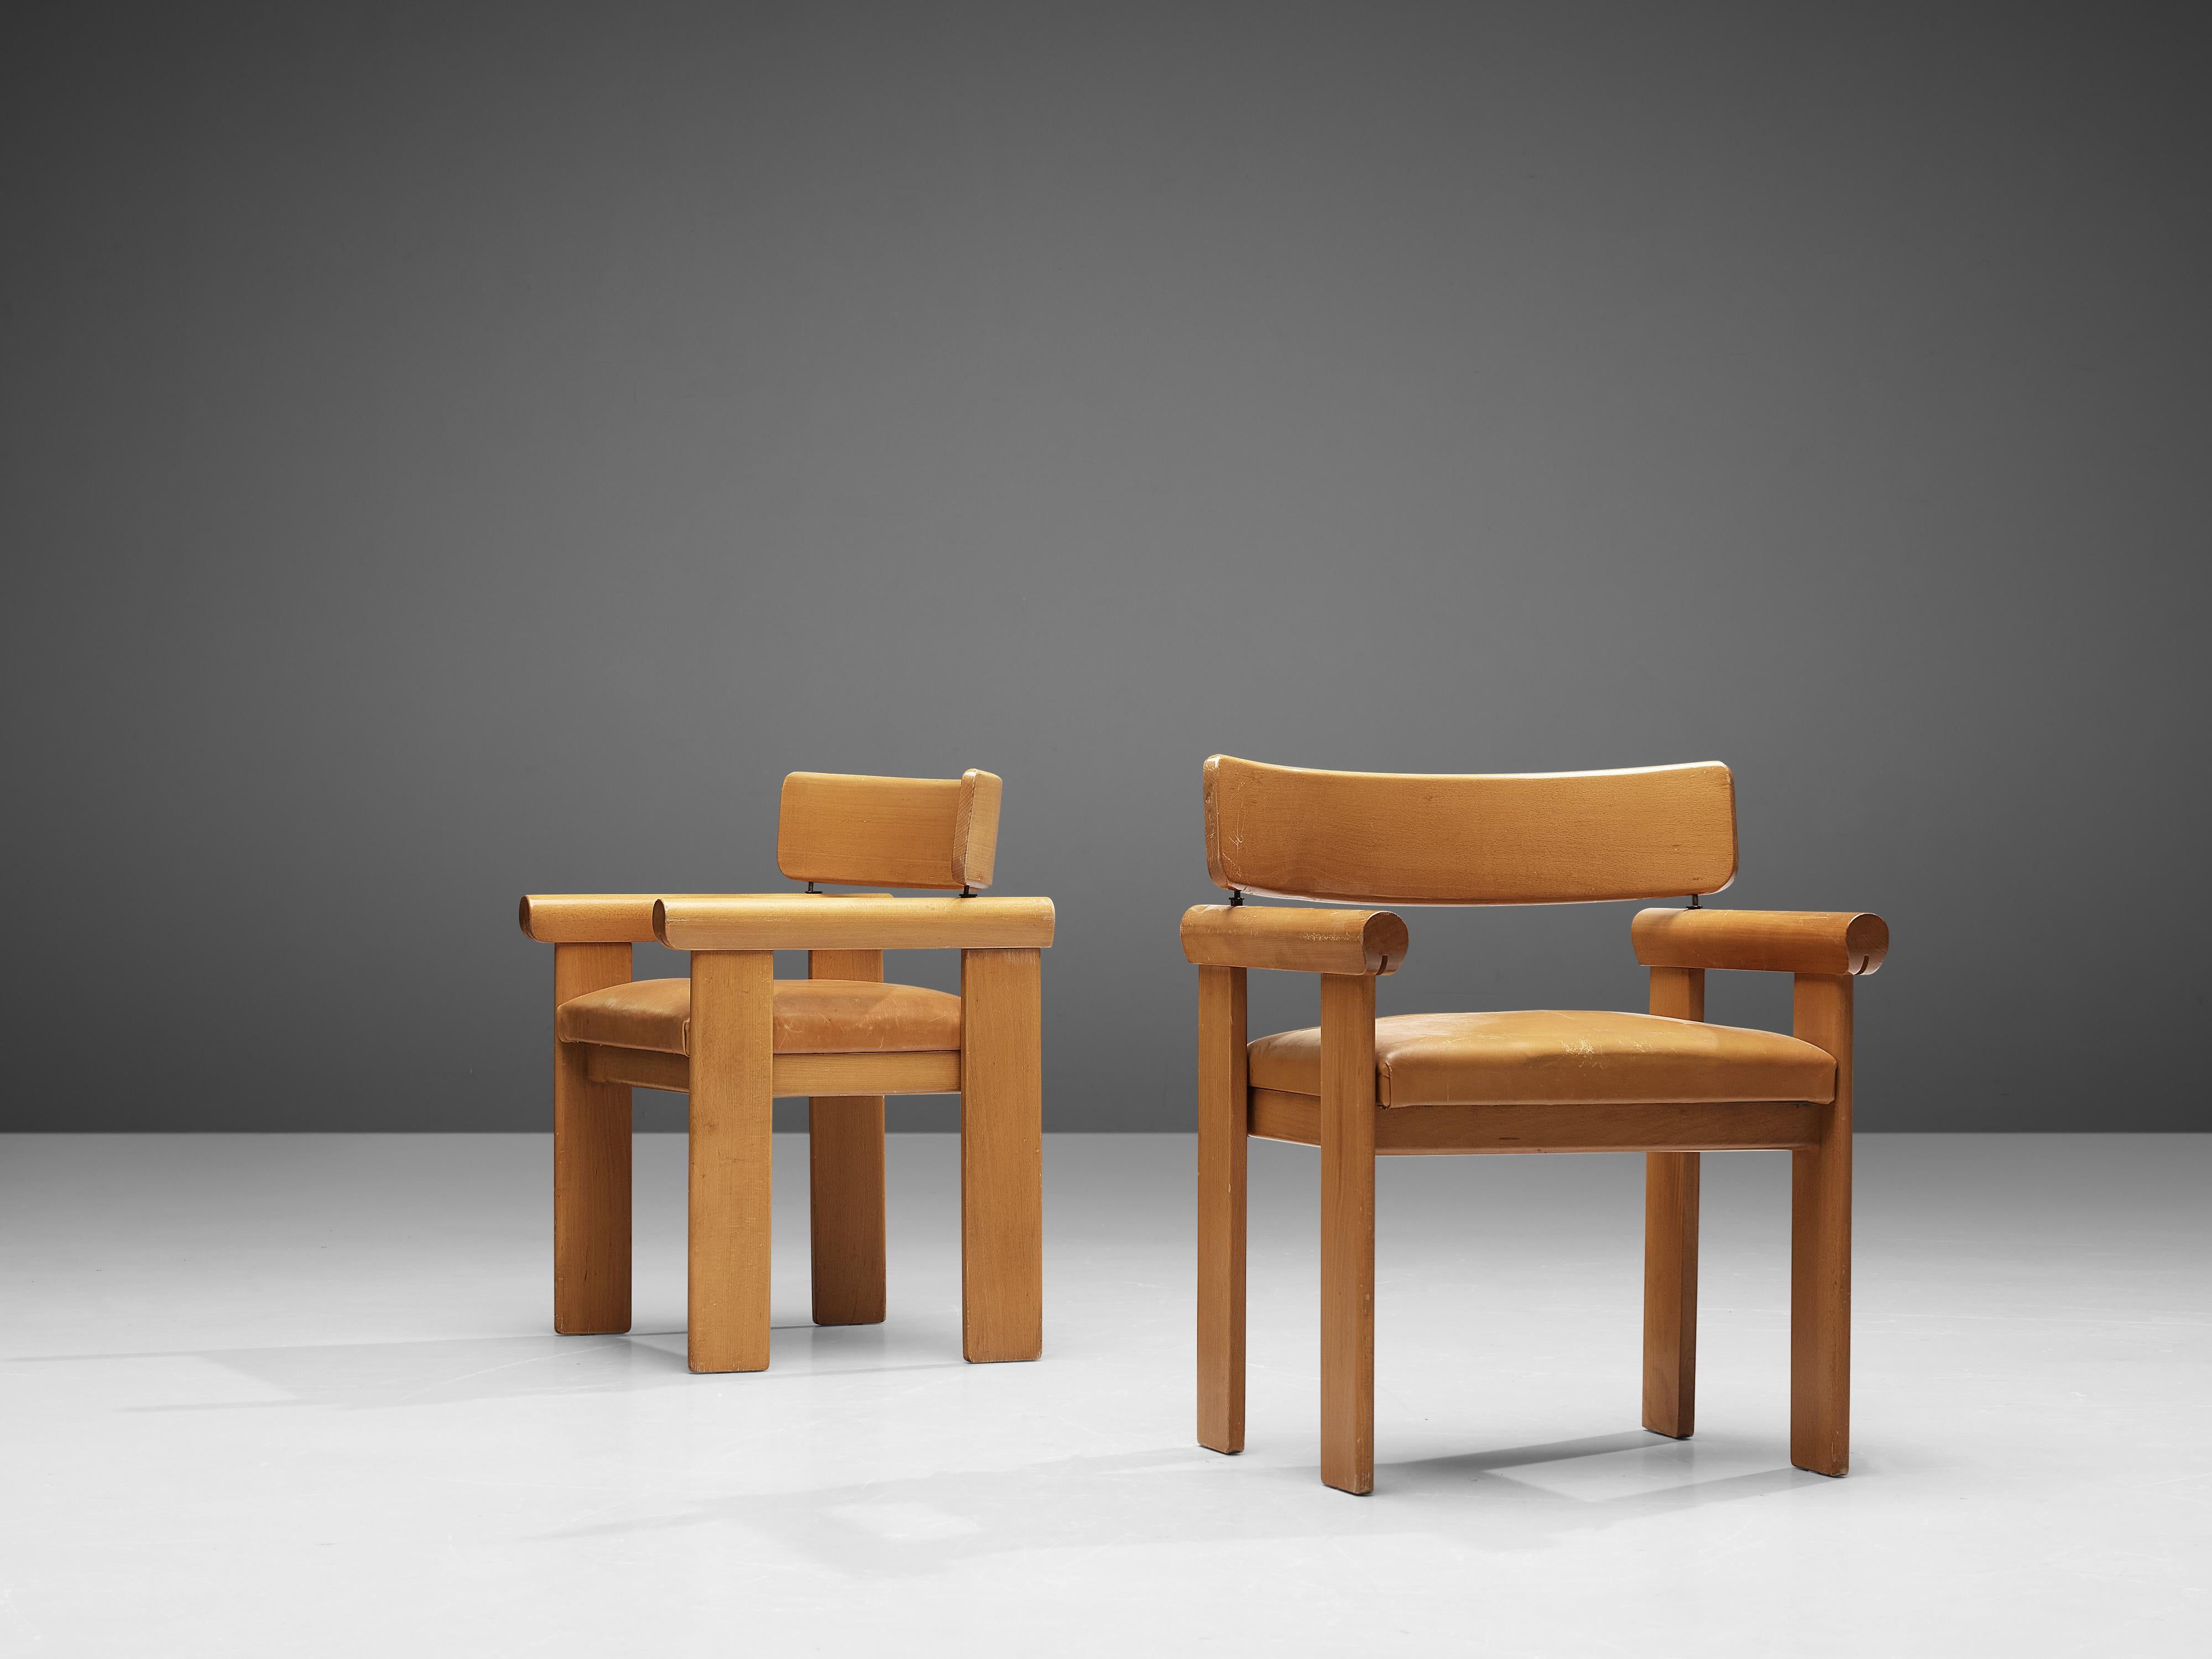 Pair of dining chairs, beech, cognac leather, Italy, 1960s

Pair of Italian dining chairs with a characteristic beechwood frame. The frame consists of beechwood slats. One of them is curved and placed horizontally: this is the slat that functions